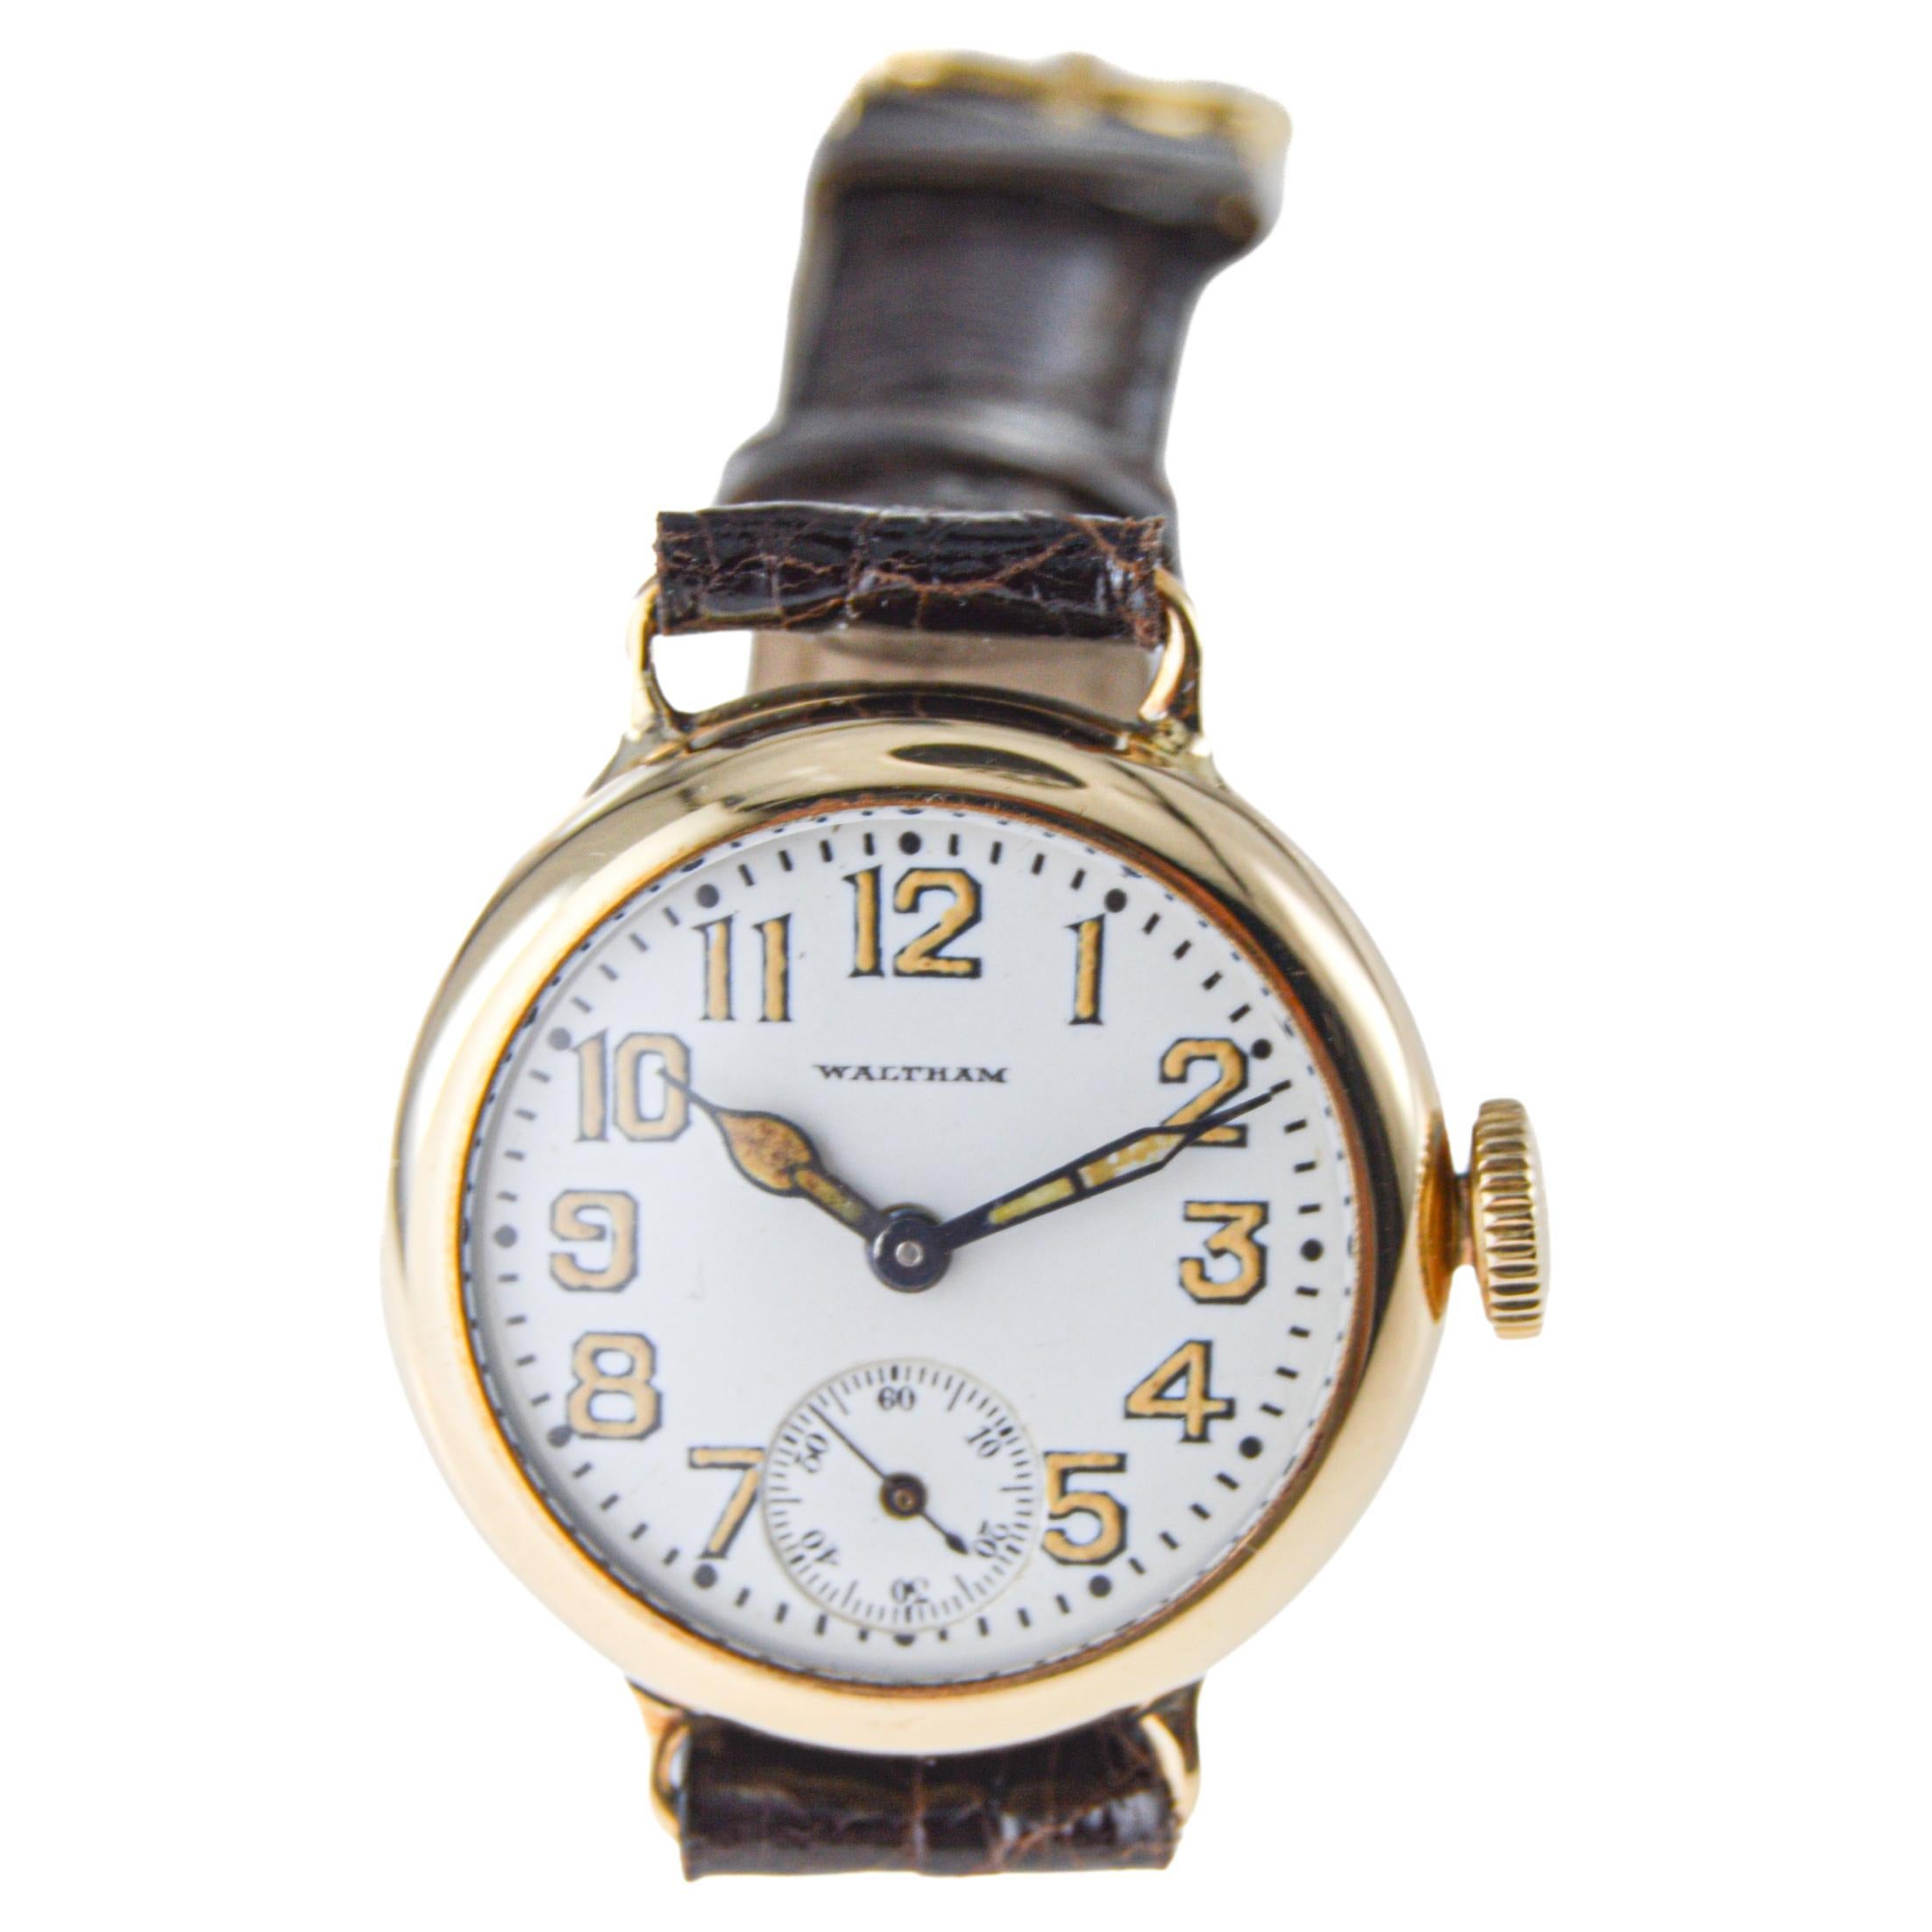 Waltham 14Kt. Gold Campaign Style Watch from 1915 with Original Enamel Dial 1929 For Sale 2